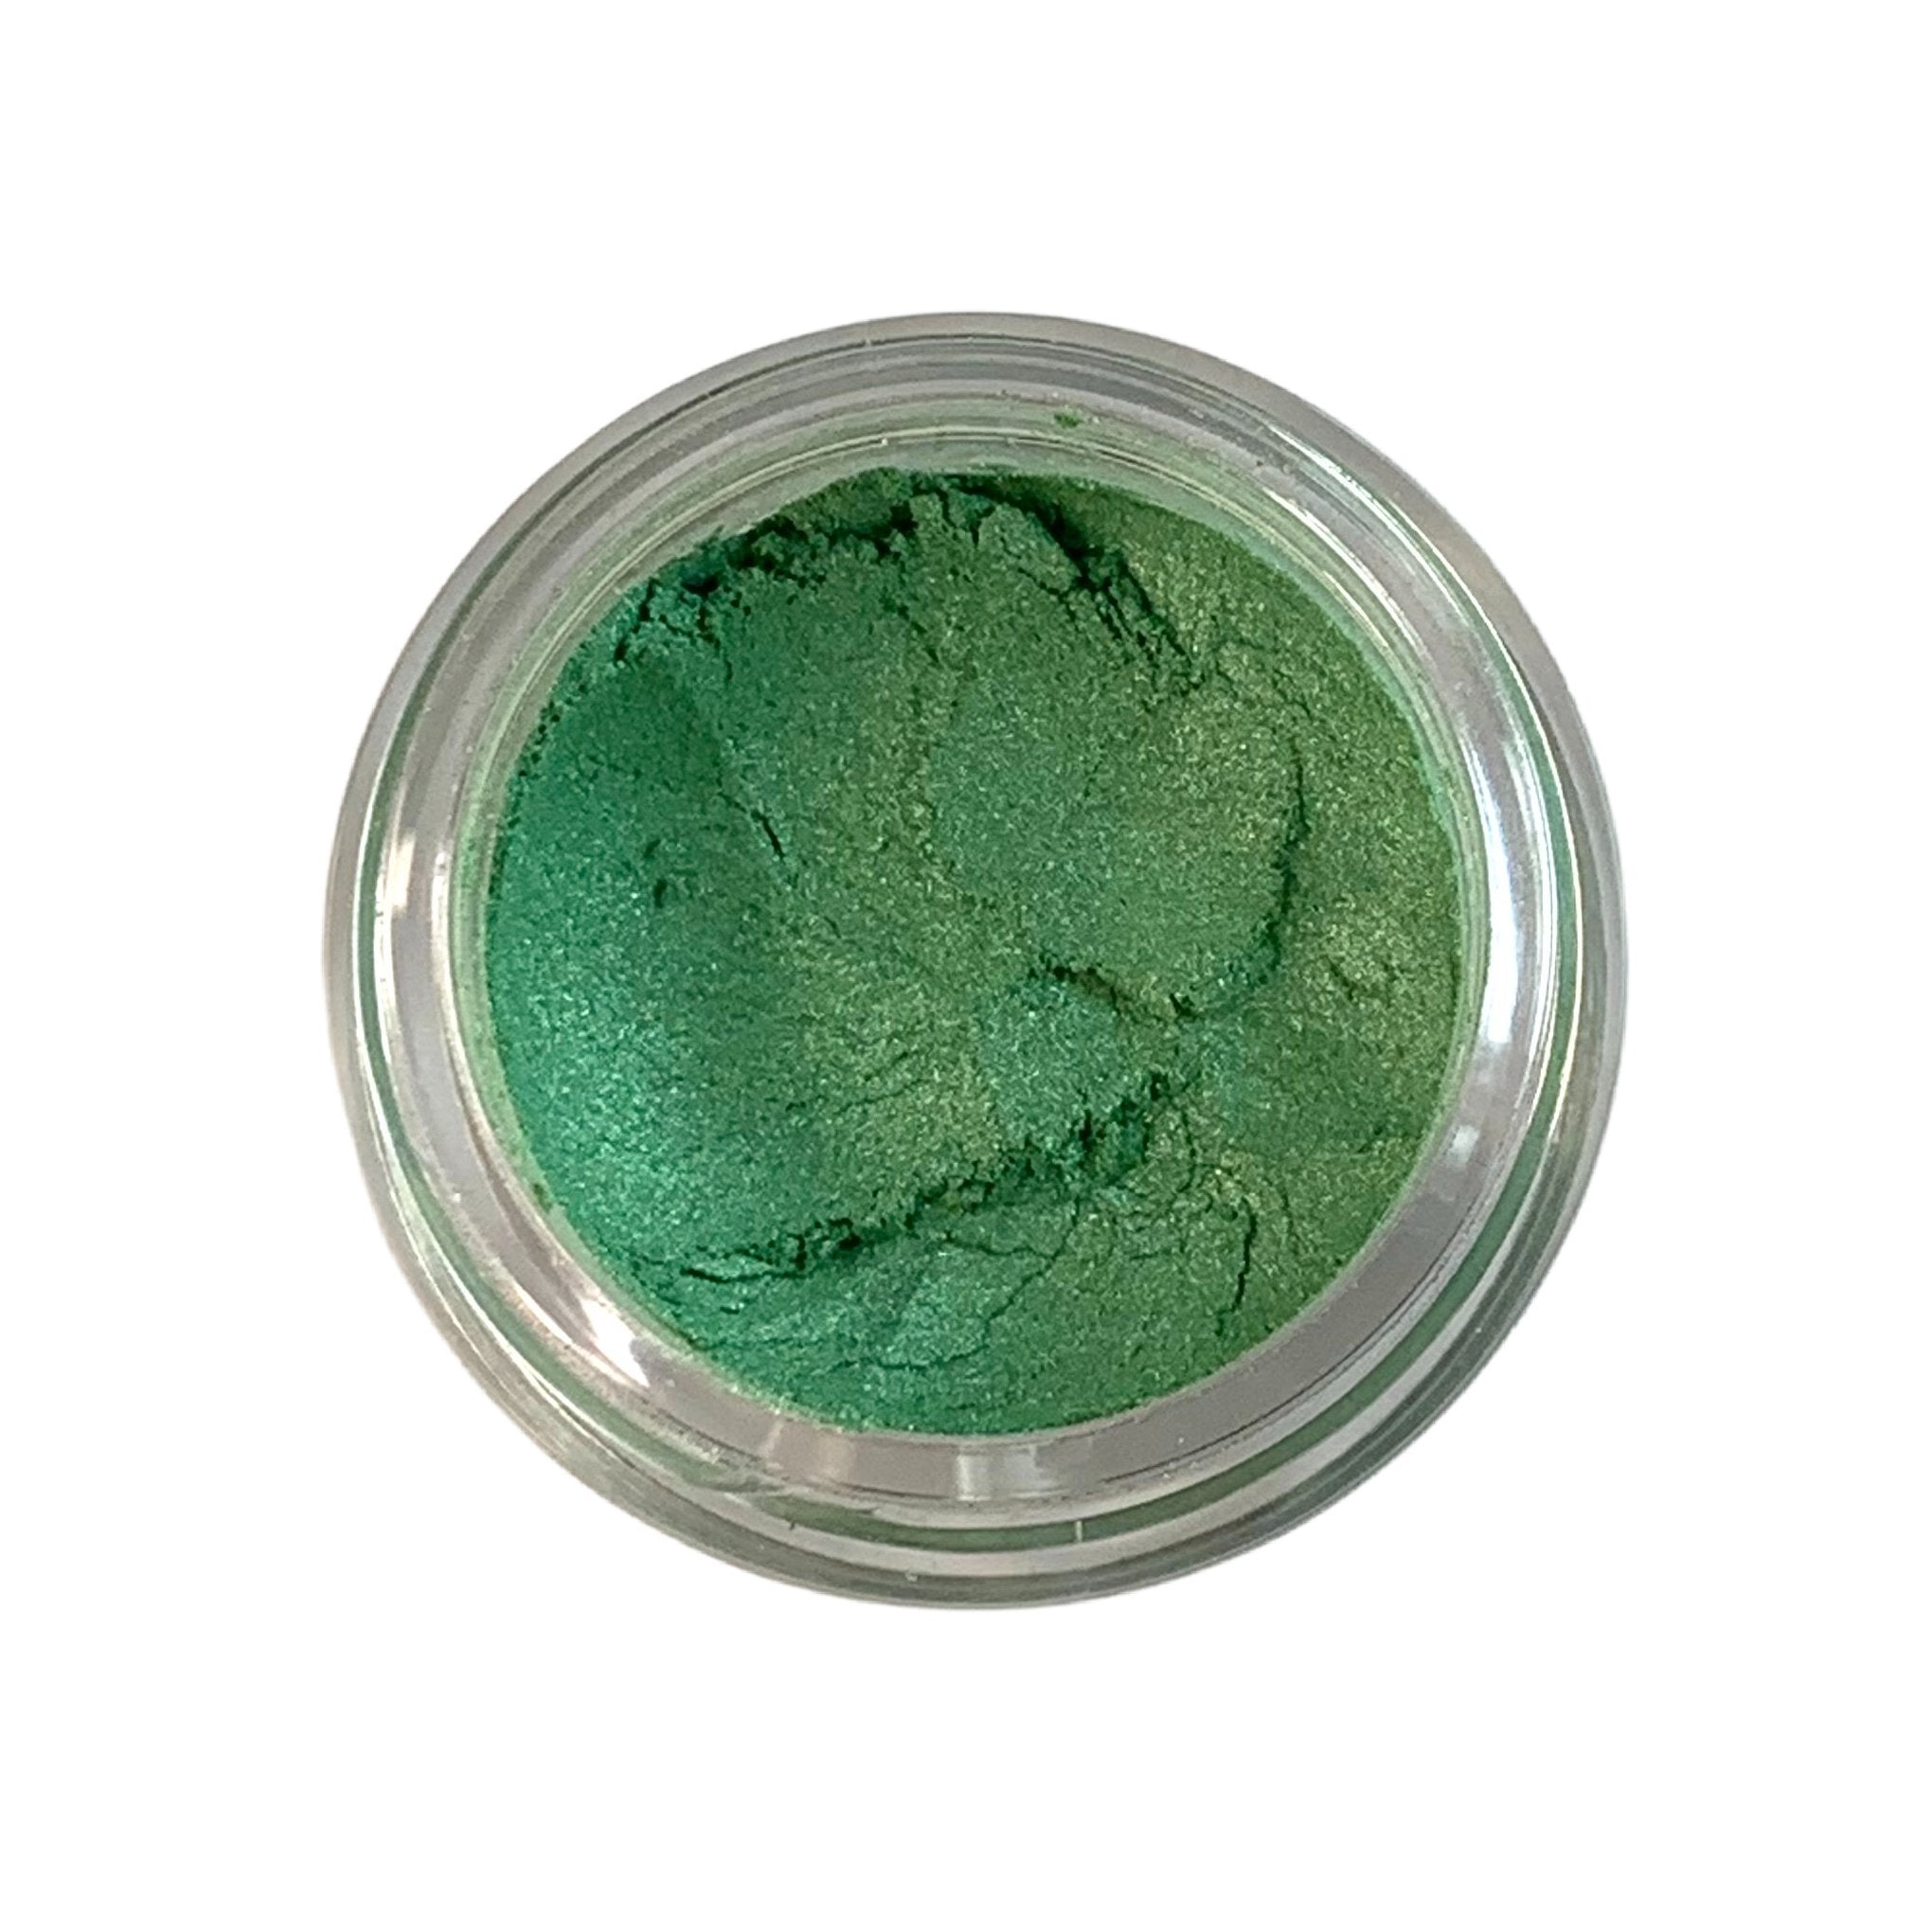 aventurine loose mineral eyeshadow in a green tone. comes in a 10 gram sifter jar. vegan and cruelty free.